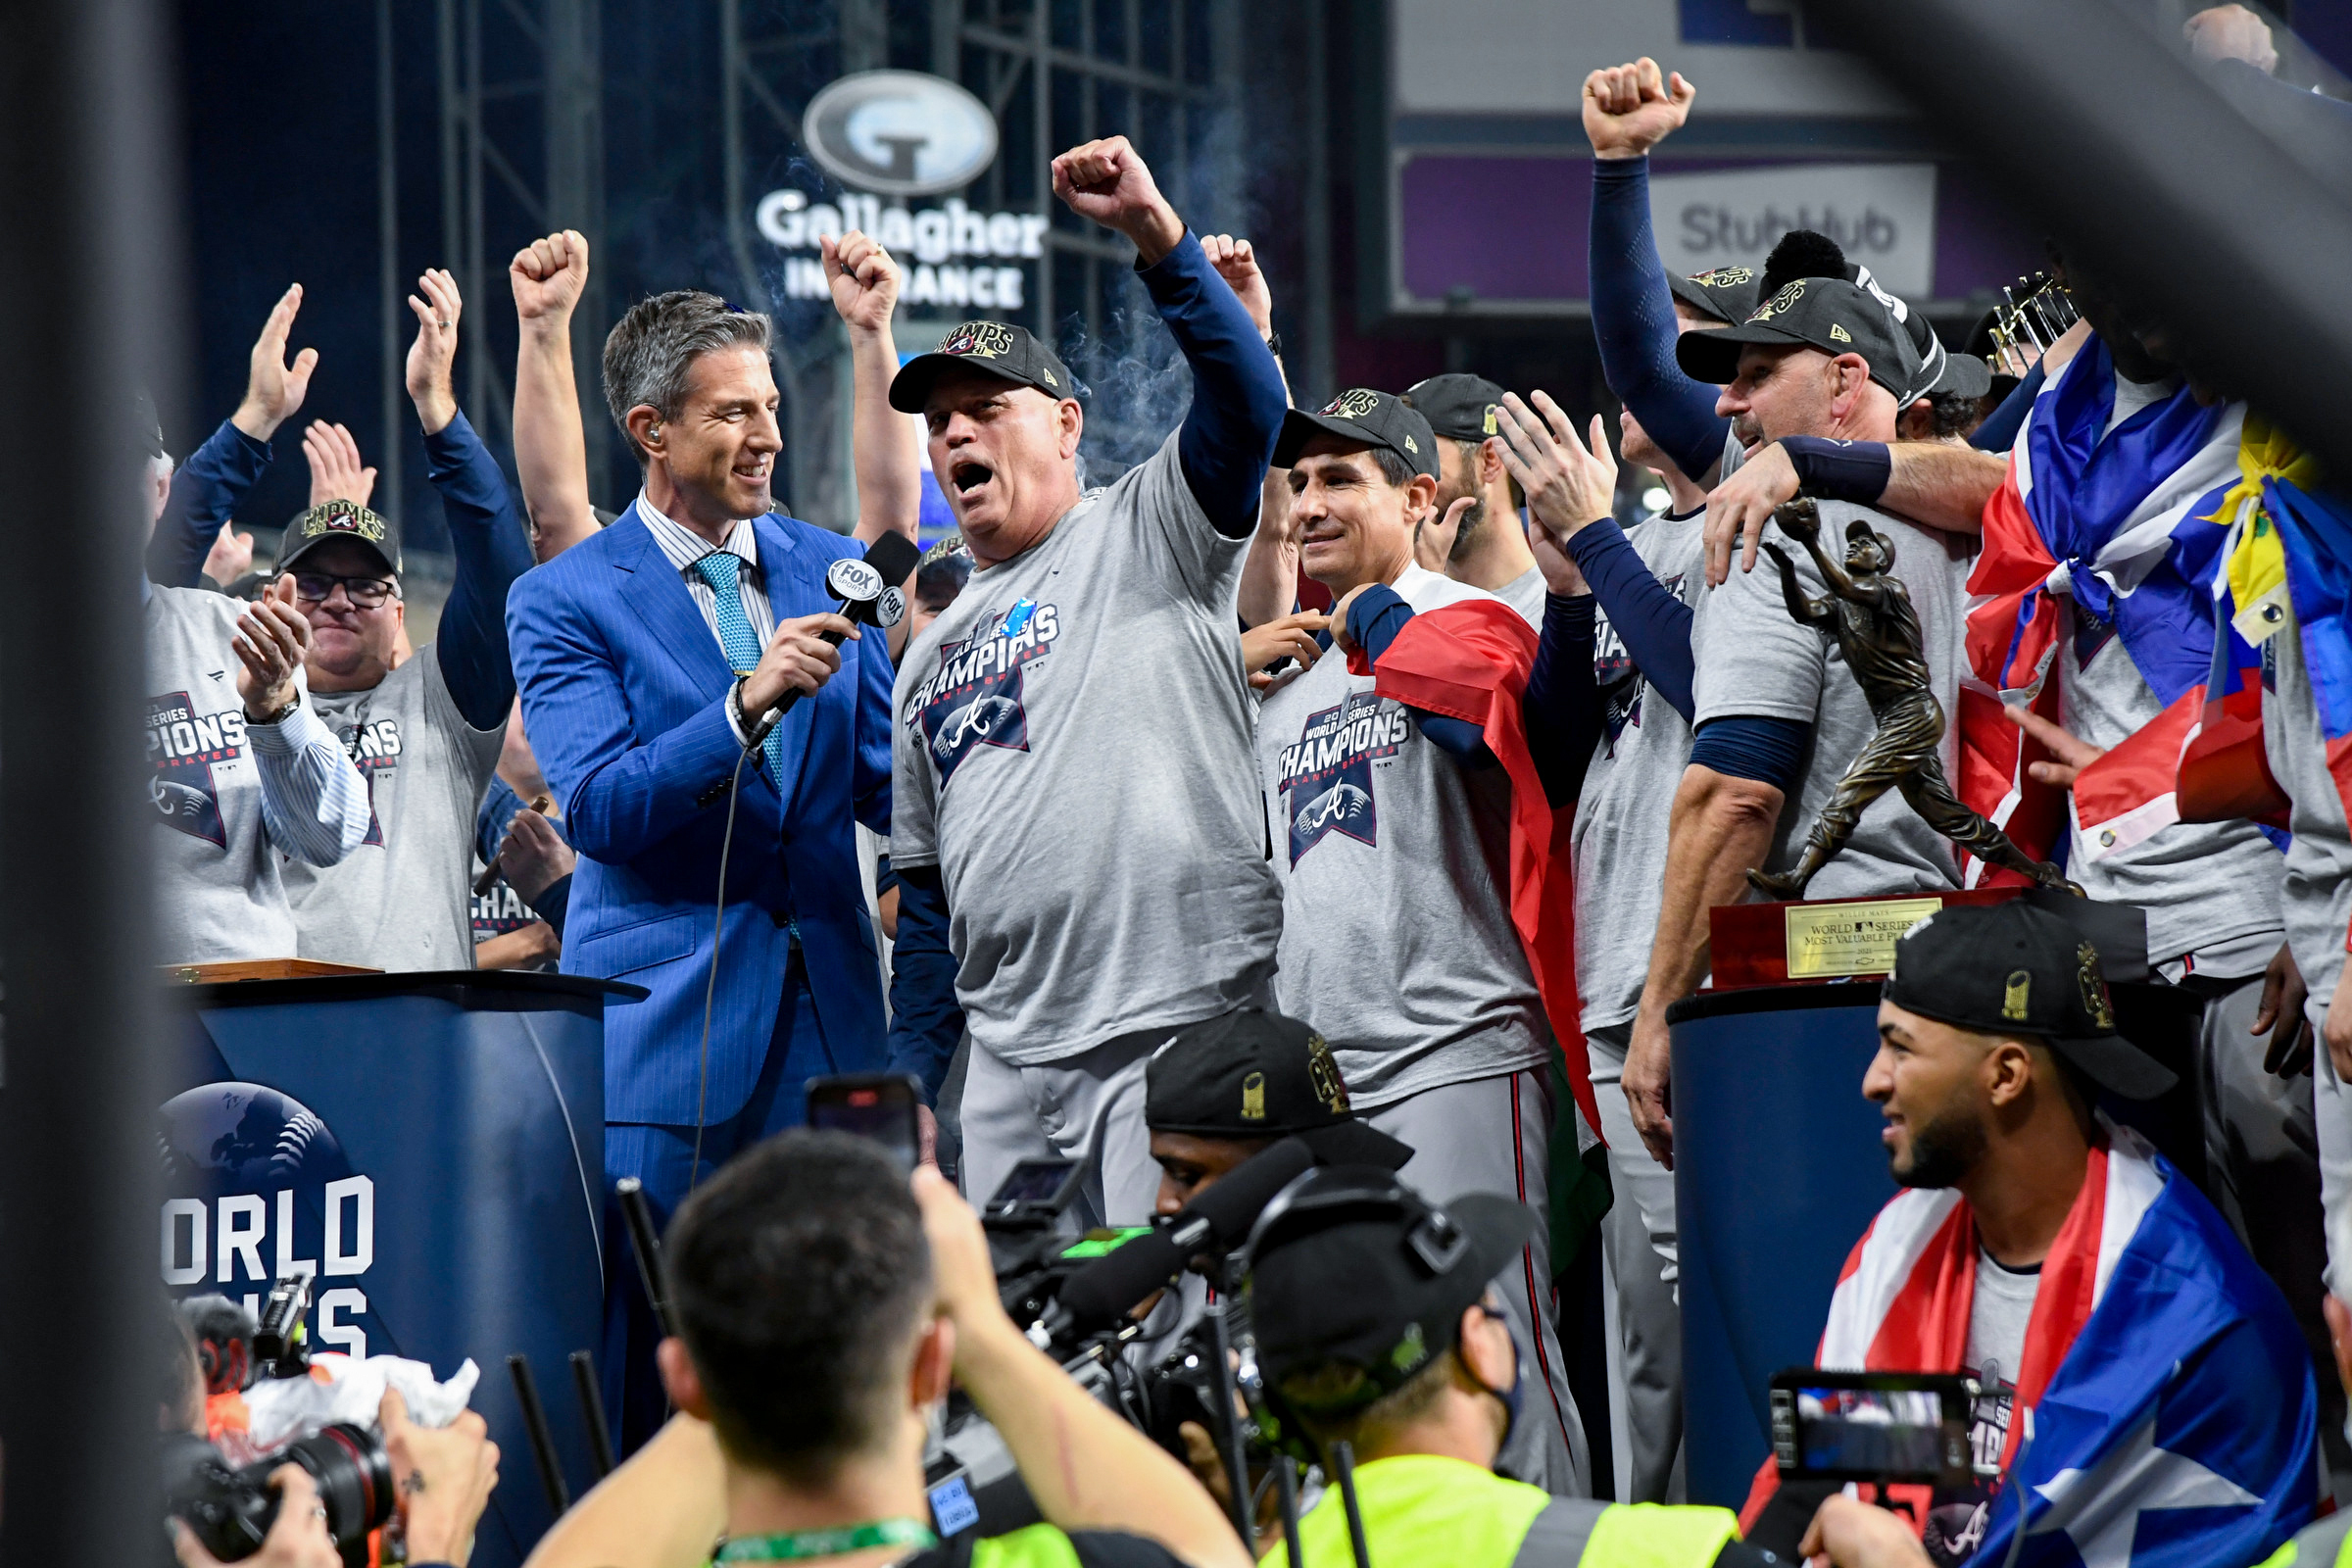 Braves win World Series: Championship is unexpected, yet fitting